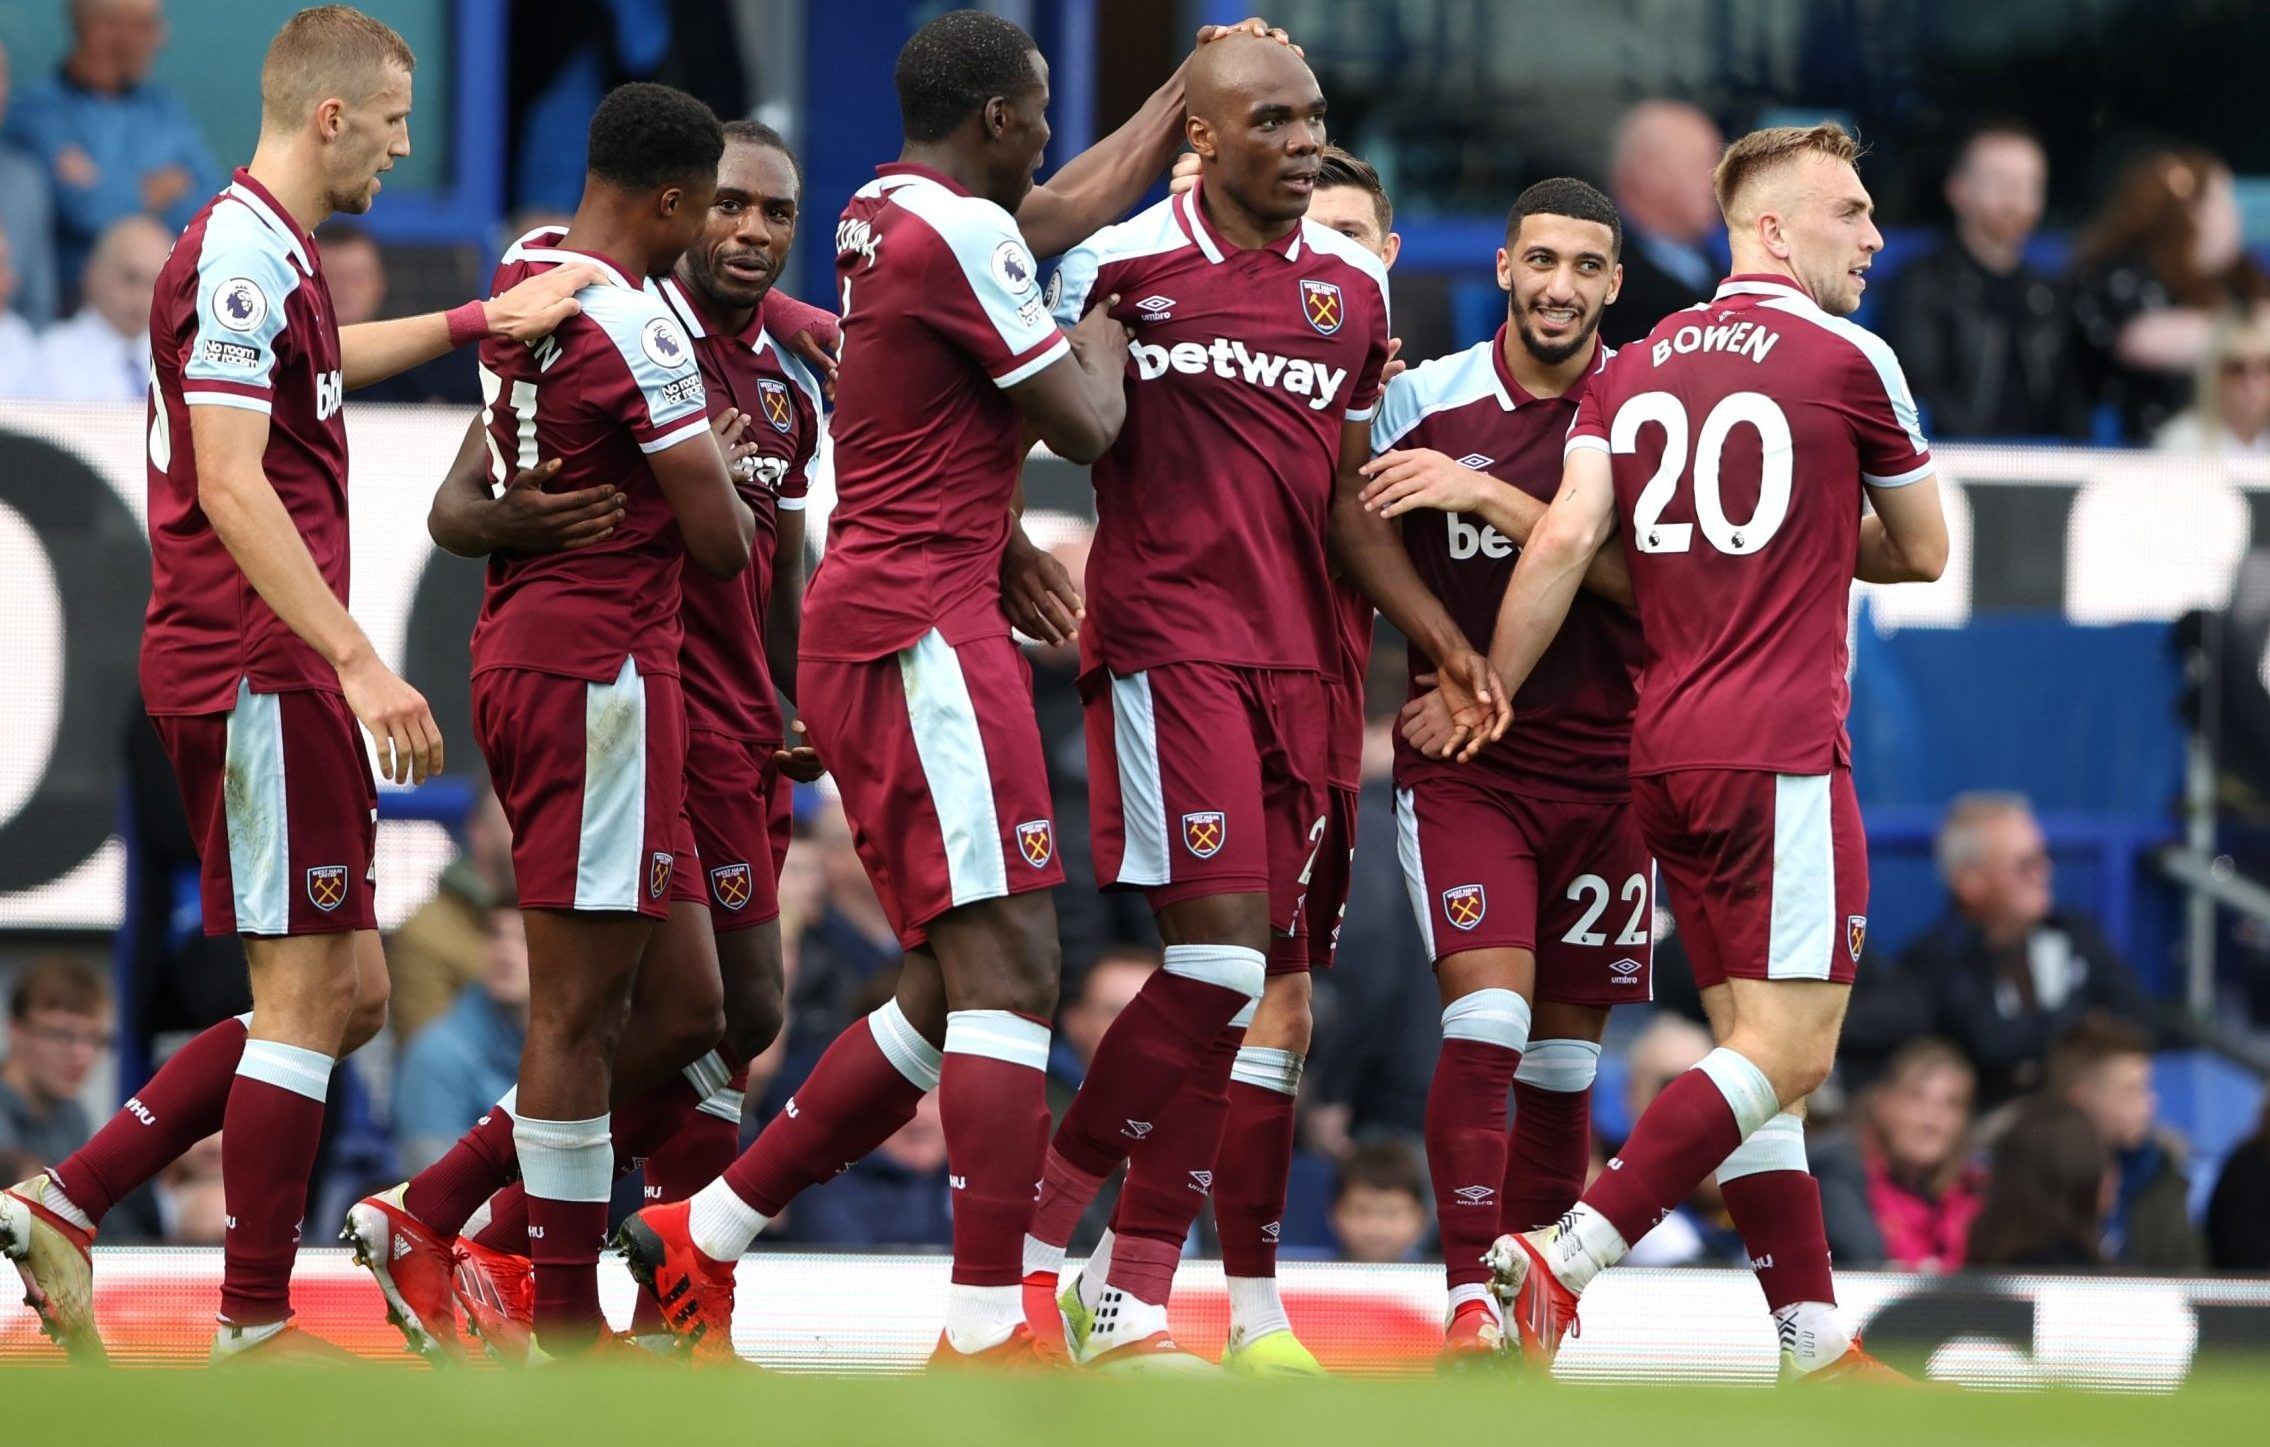 West Ham players celebrate Angelo Ogbonna's goal against Everton in the Premier League